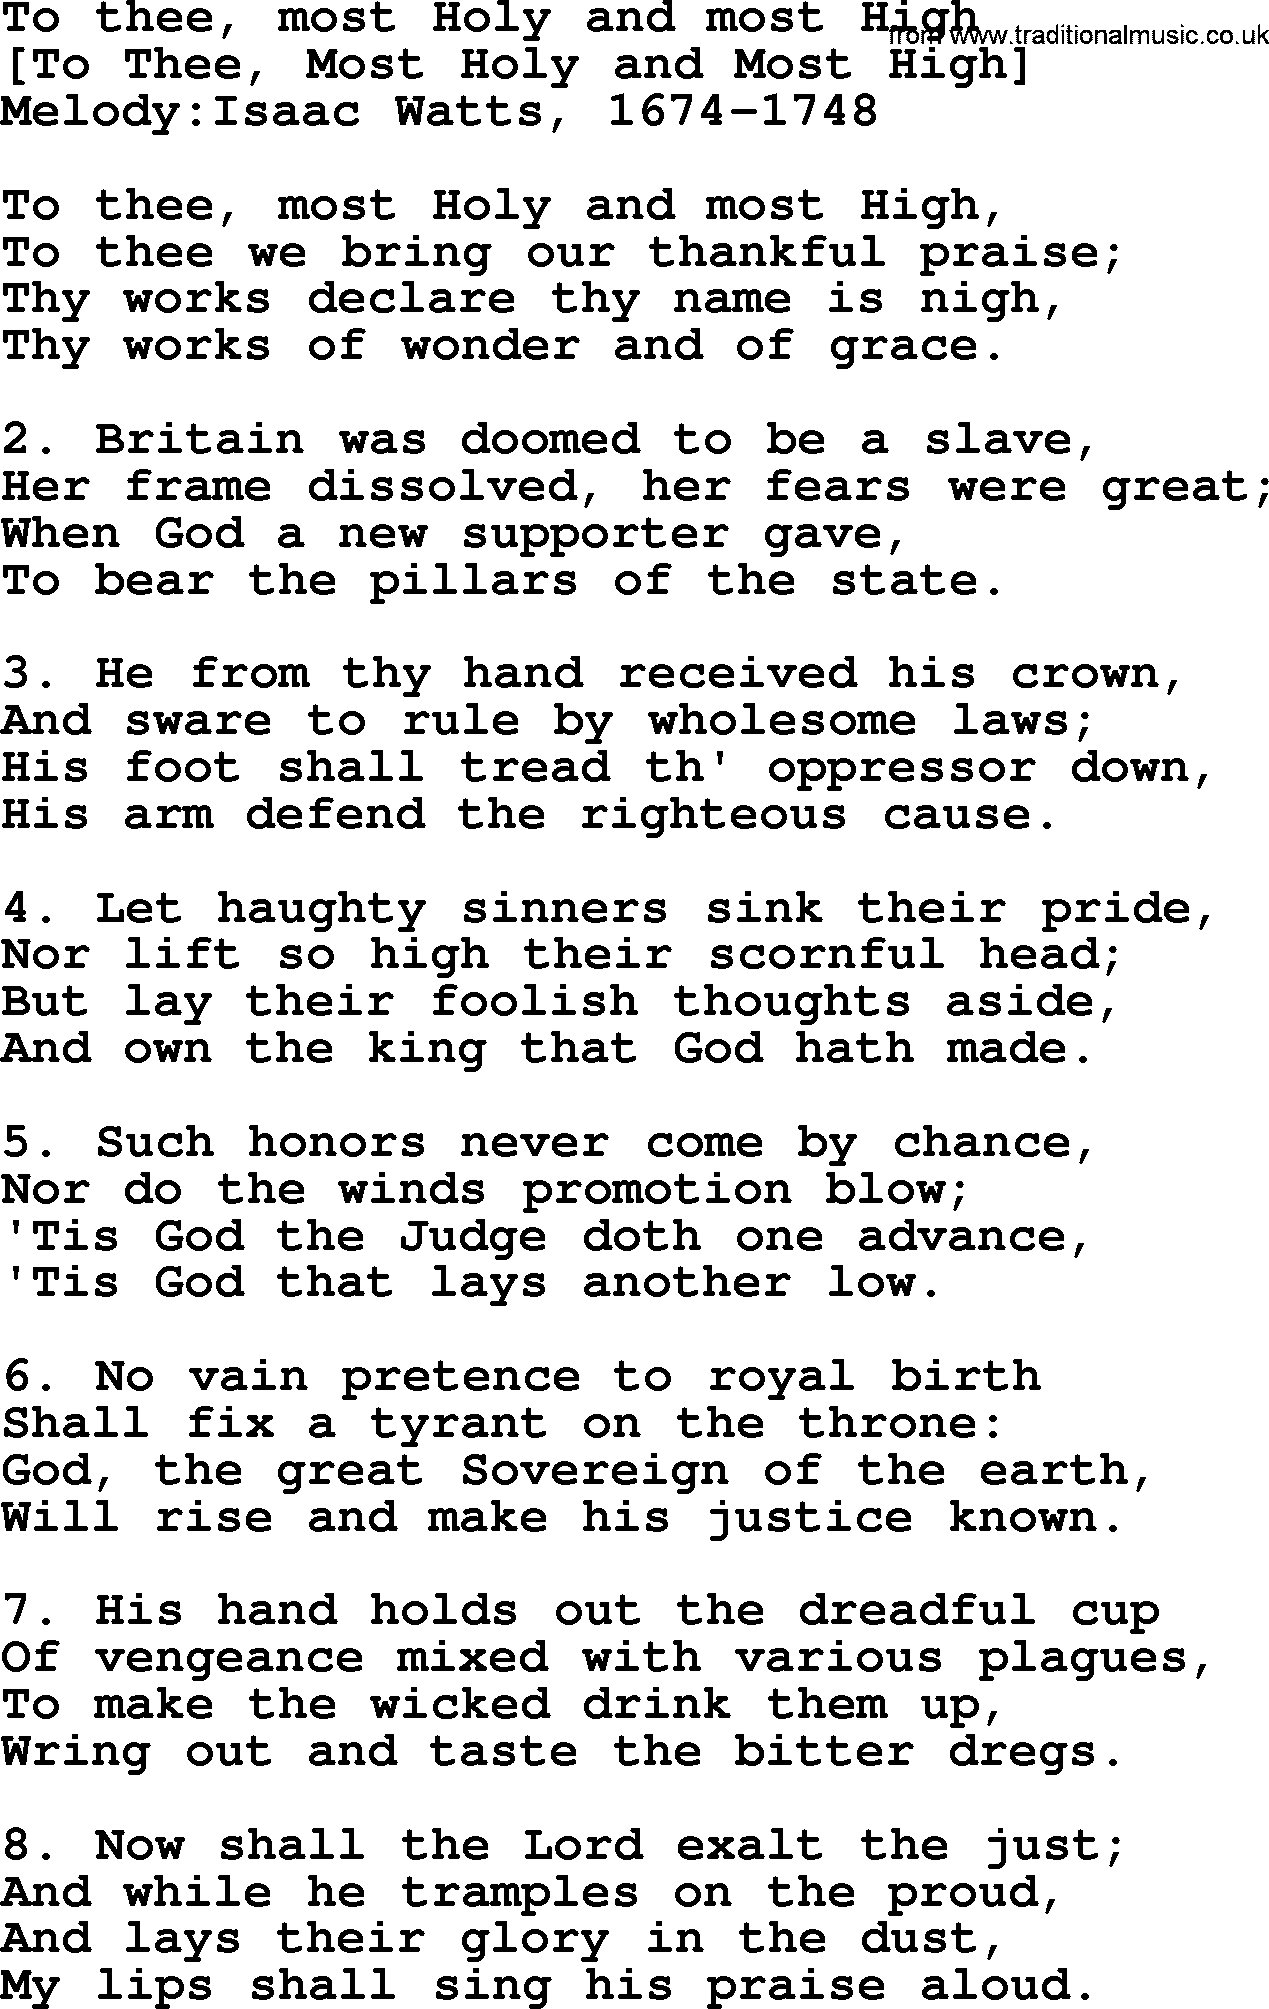 Old English Song: To Thee, Most Holy And Most High lyrics